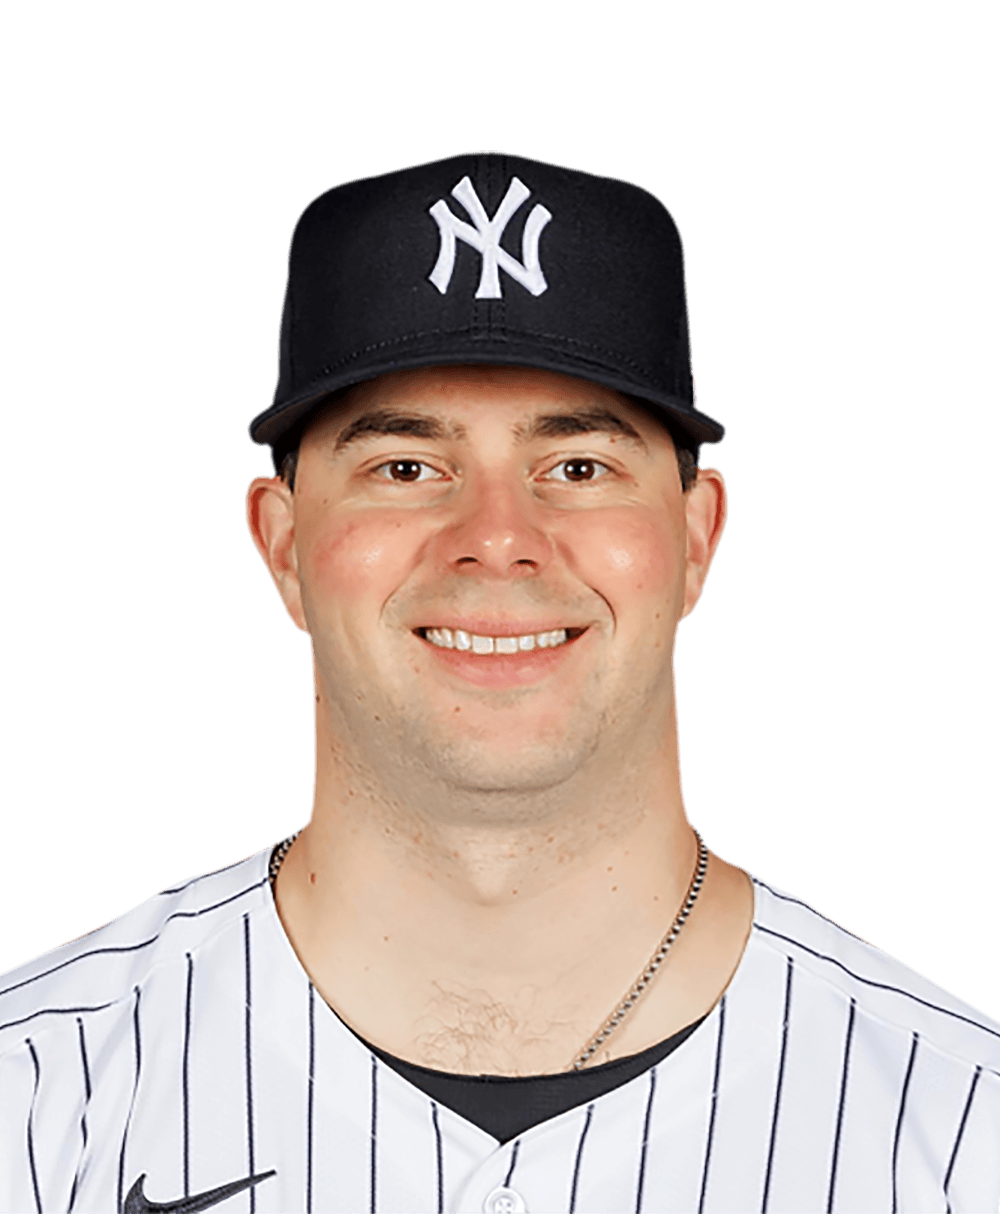 Yankees: Jonathan Loaisiga to 15-day IL, Anthony Rizzo to 60-day IL